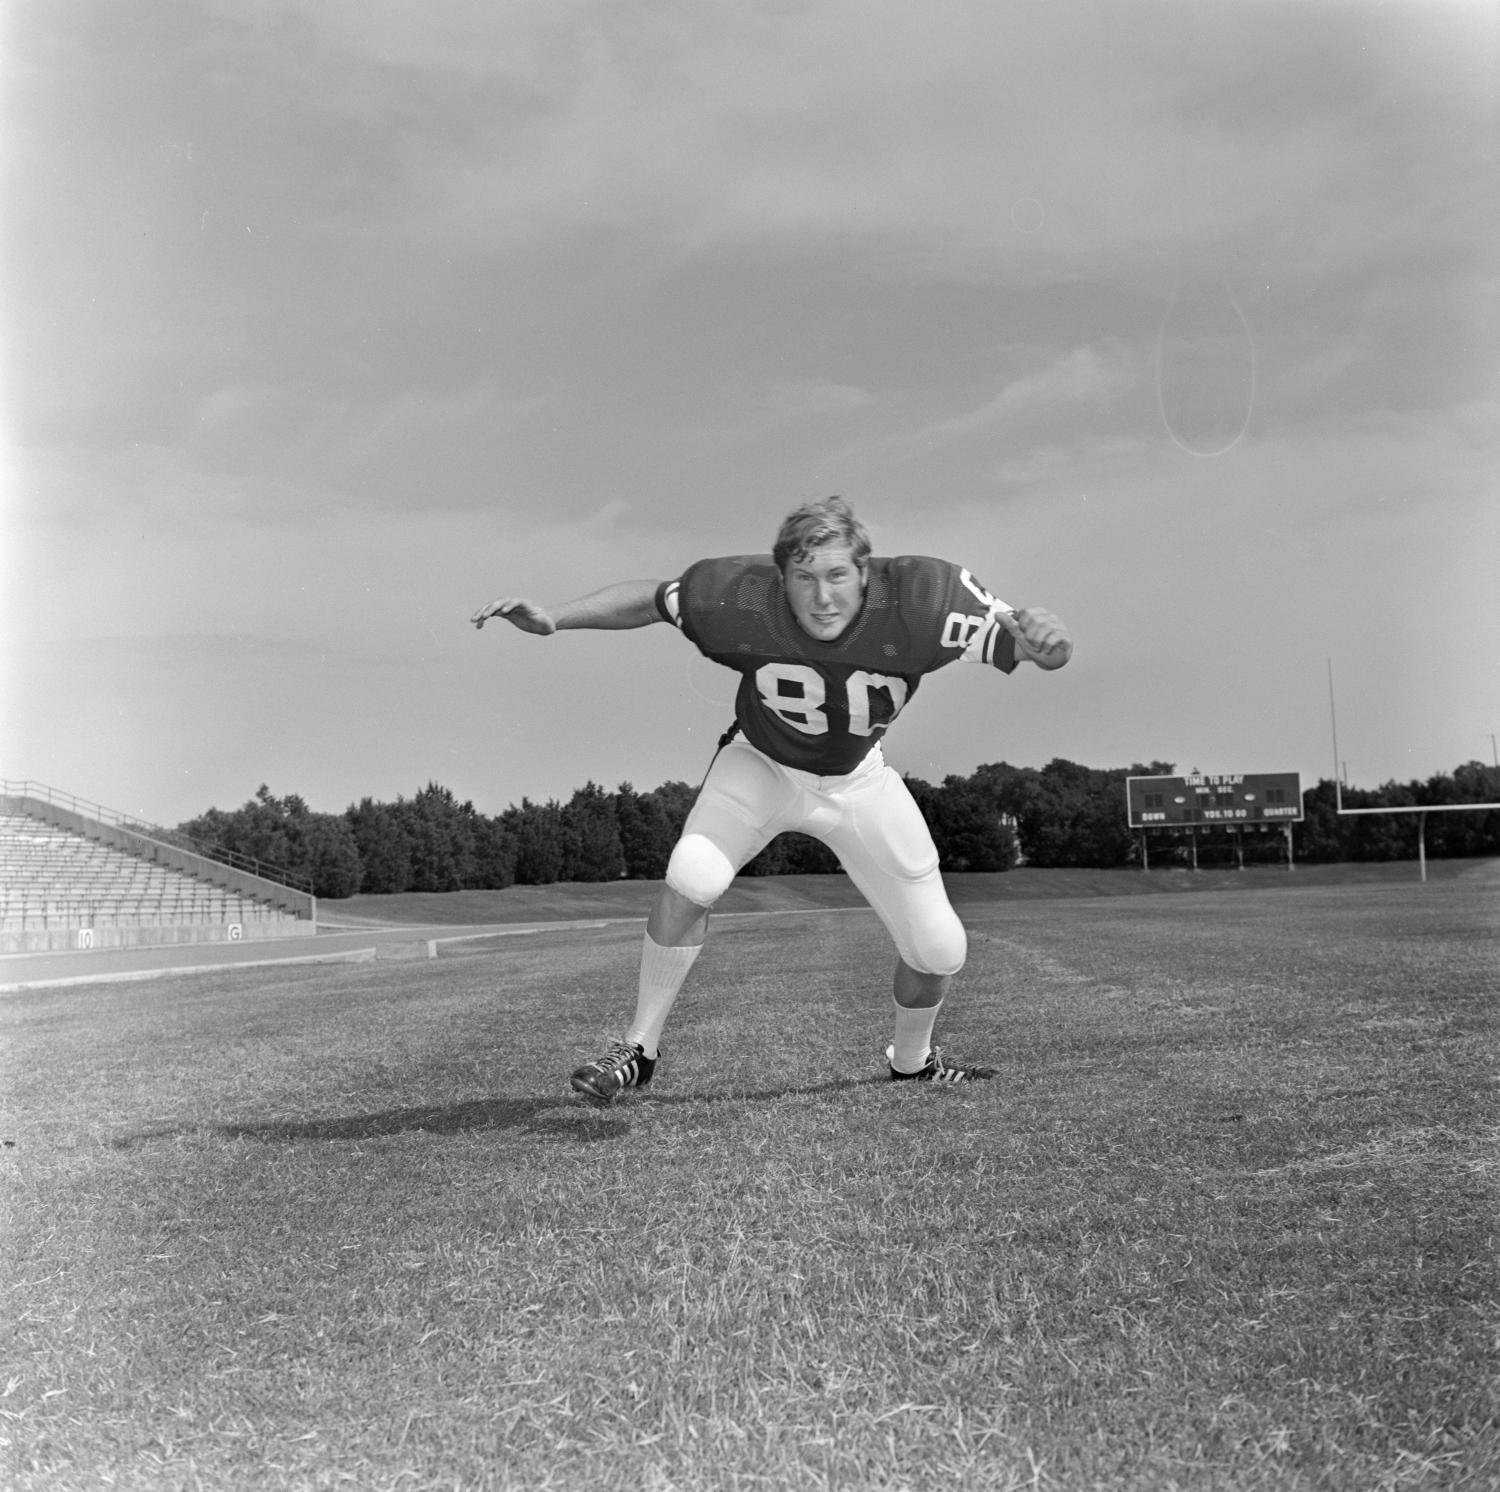 [Football player #80, R. Hinch, running toward the camera on a flat stadium field]
                                                
                                                    [Sequence #]: 1 of 1
                                                